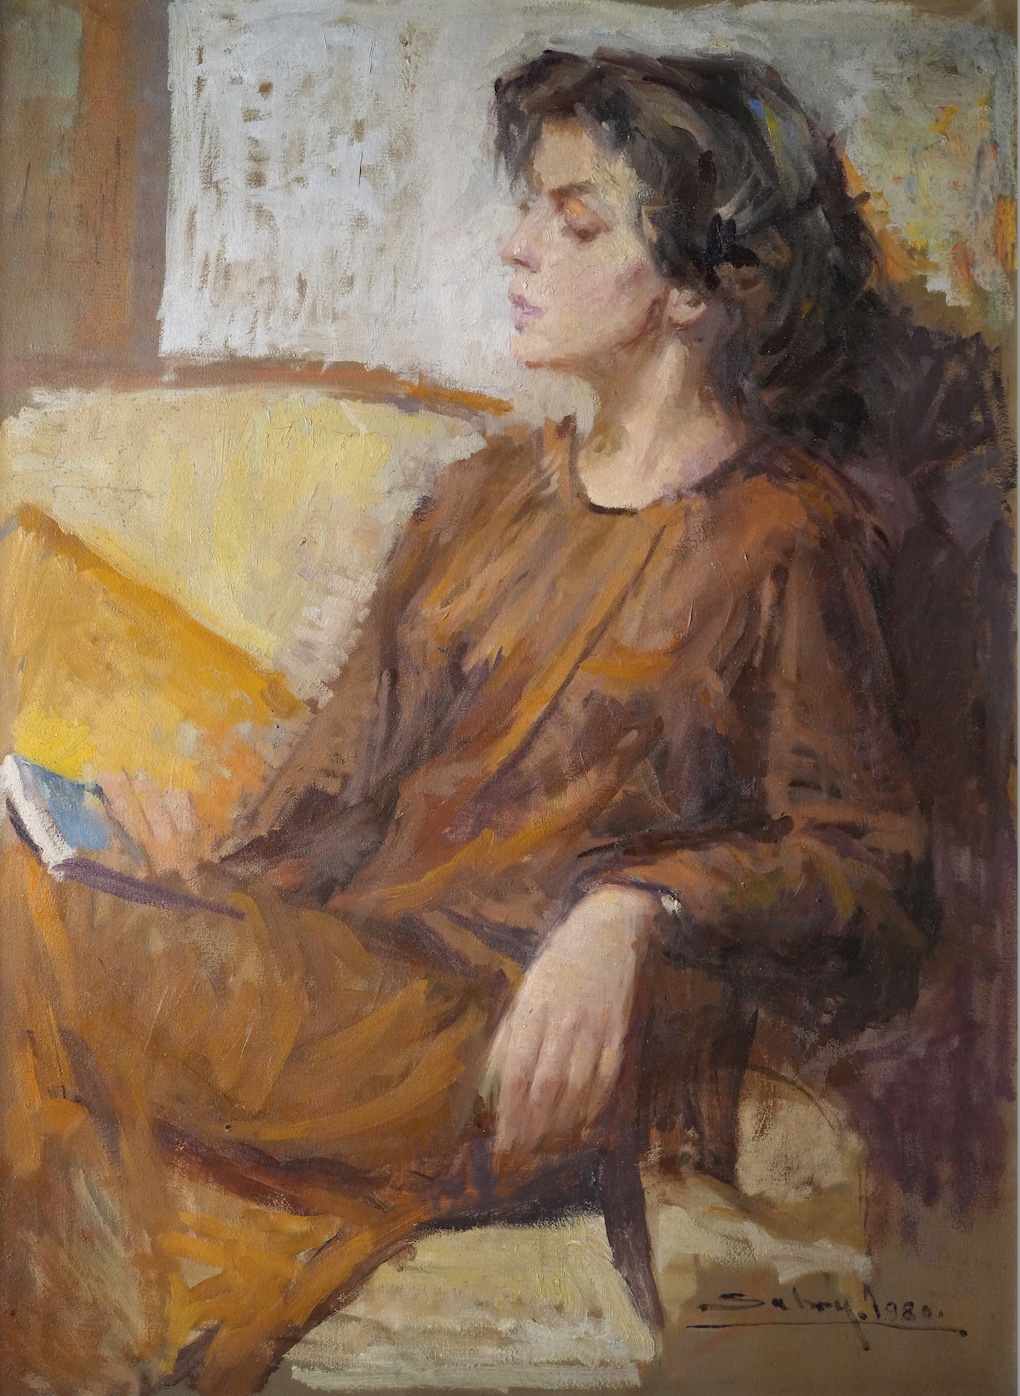 SABRY RAGHEB (1920­‐2000)  Portrait of seated woman (1980)  60 x 80 cm   Oil on canvas Signed and dated Sabry. 1980 lower right